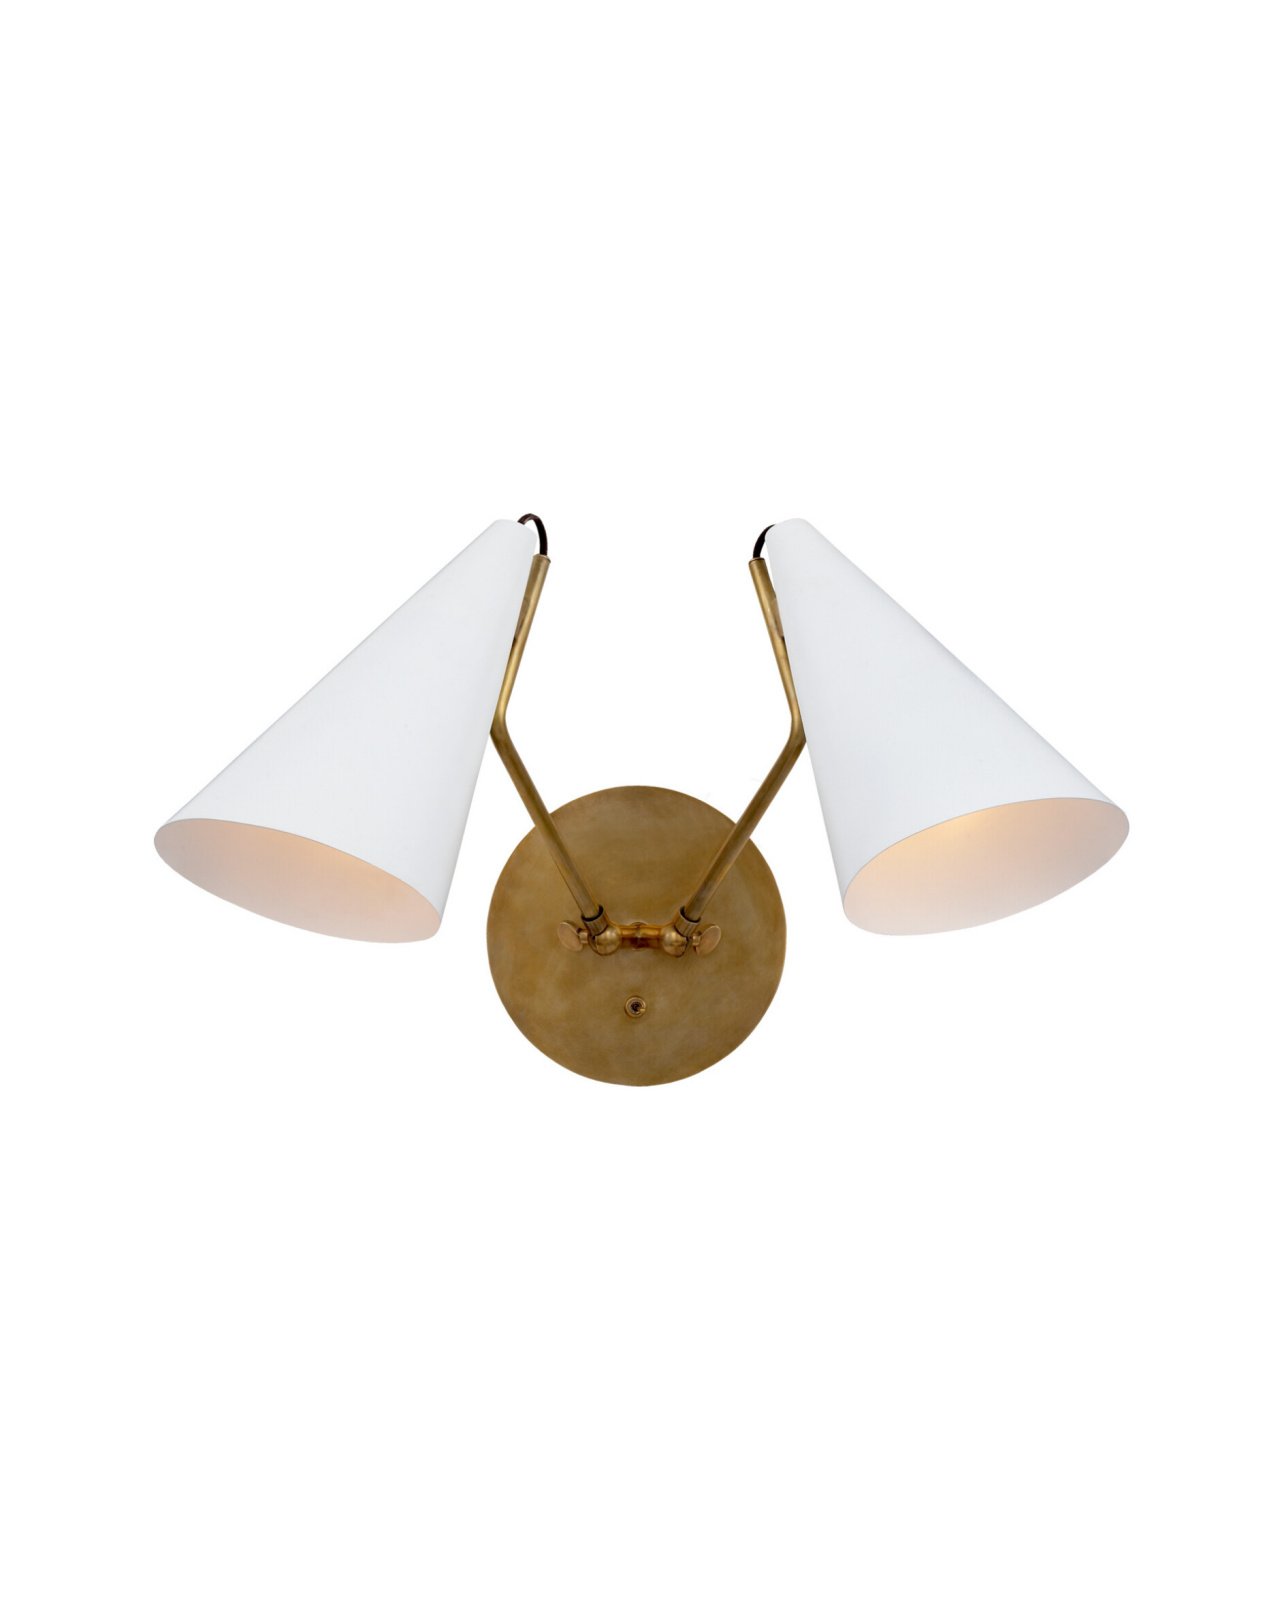 Clemente Double Sconce in Hand-Rubbed Antique Brass